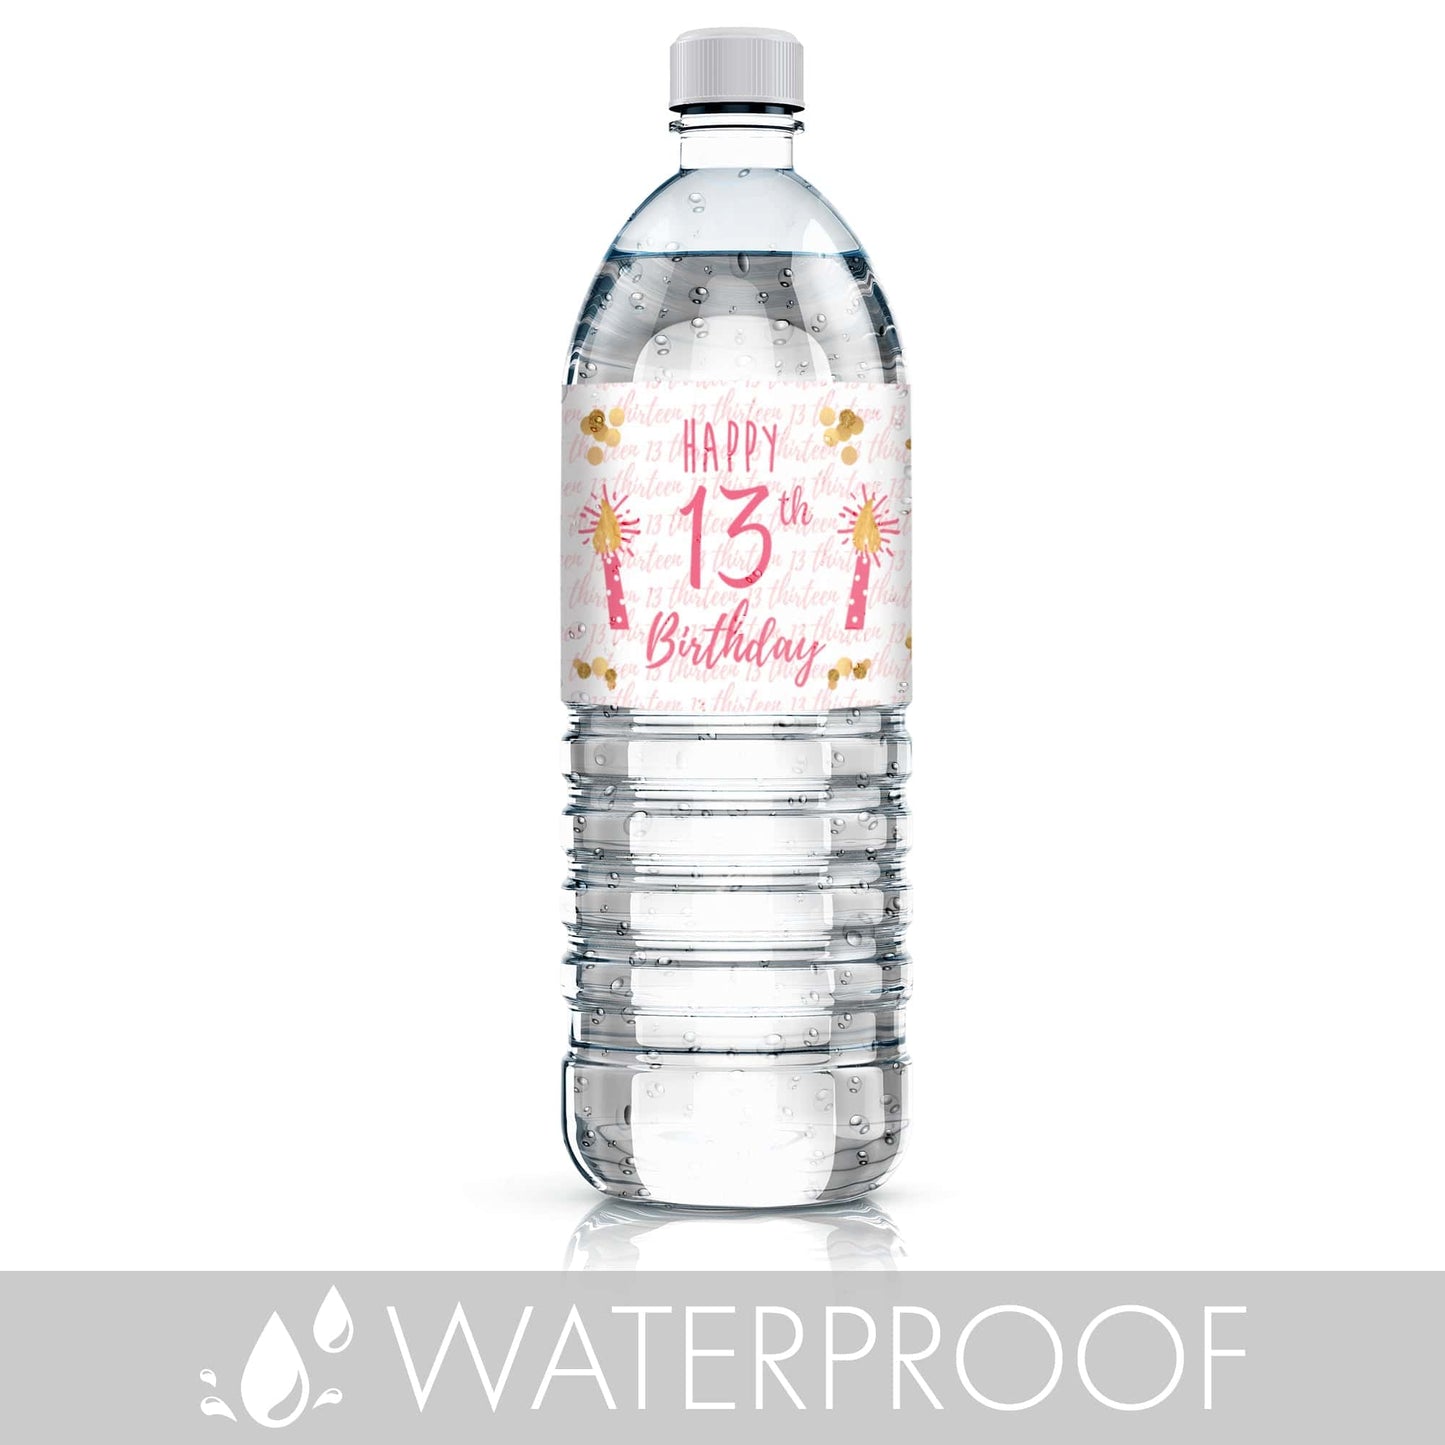 Celebrate Your 13th Birthday in Style with these Pink and Gold Water Bottle Labels - 24 Count 